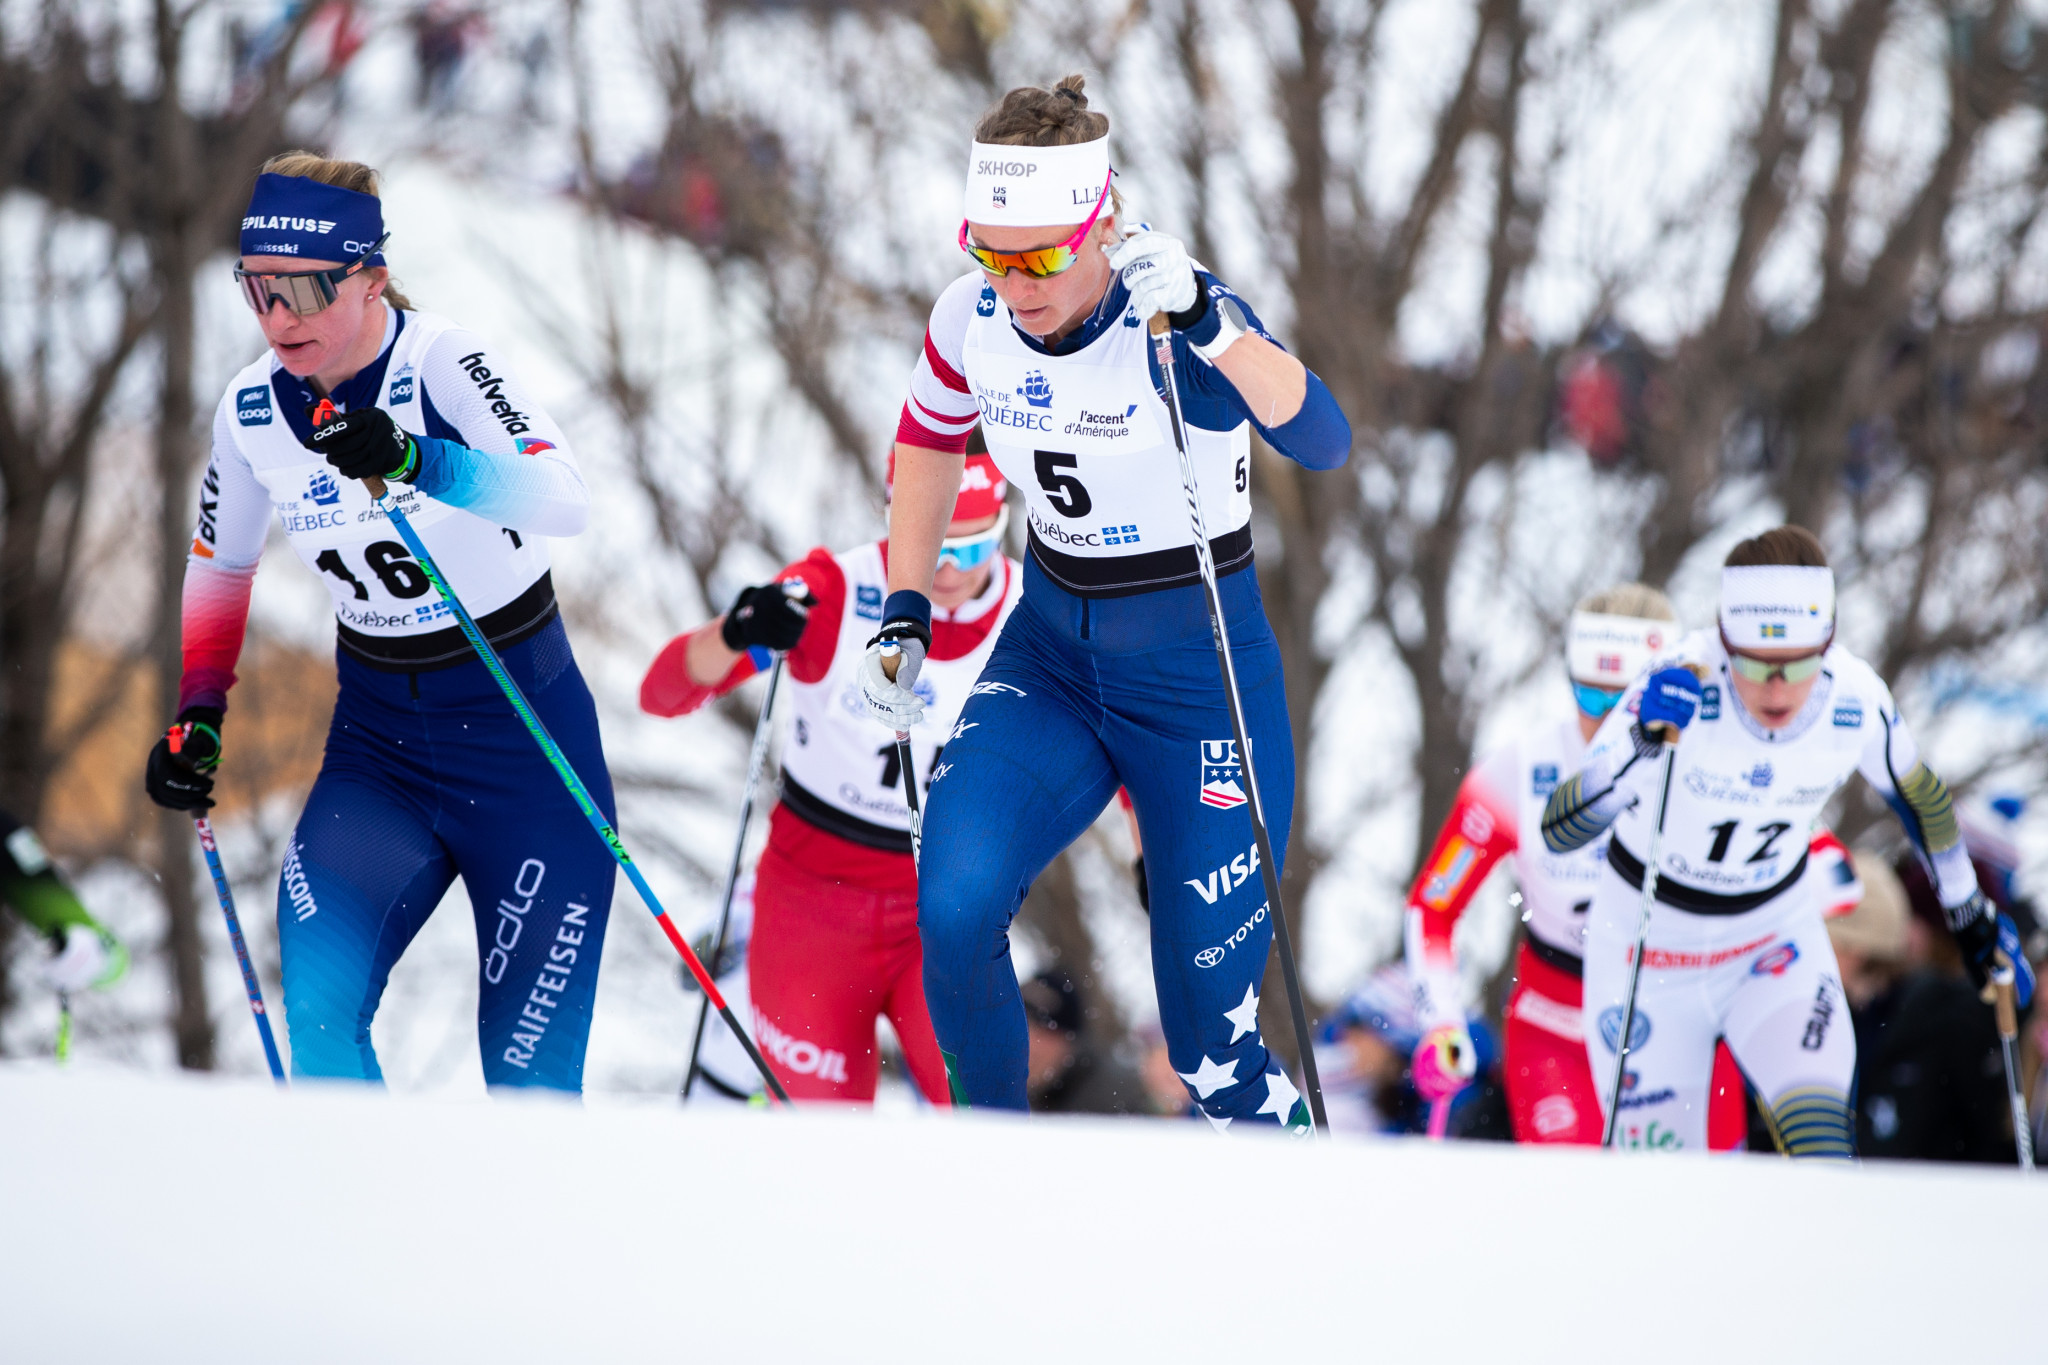 US Ski & Snowboard release schedule for 2019-2020 Cross-Country SuperTour series